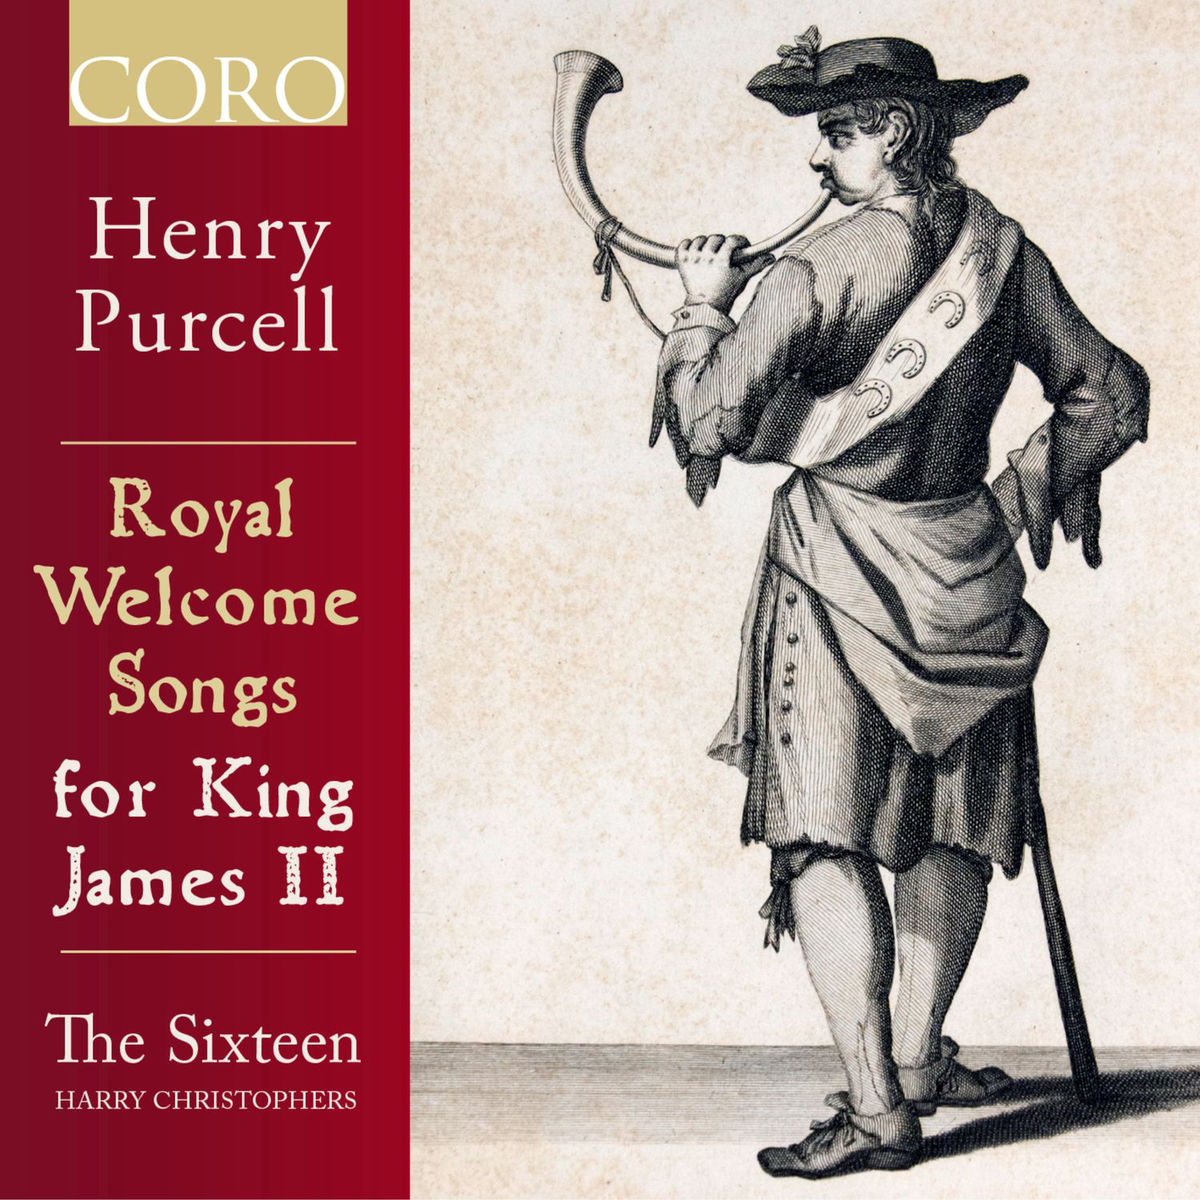 The Sixteen & Harry Christophers - Royal Welcome Songs for King James II (2017) [Qobuz FLAC 24bit/96kHz]